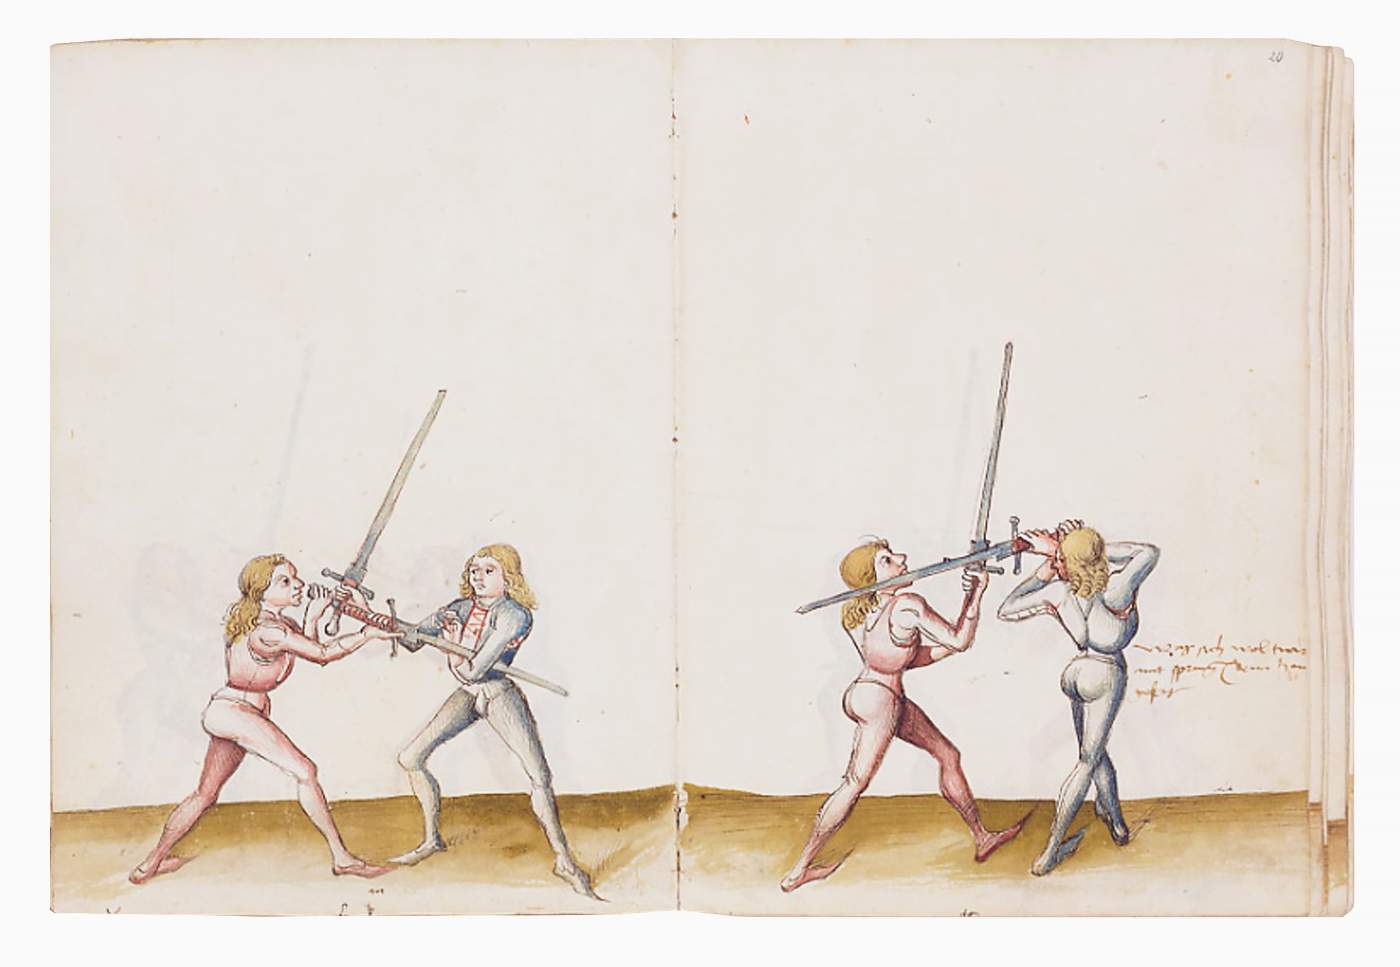 Fencing treatise